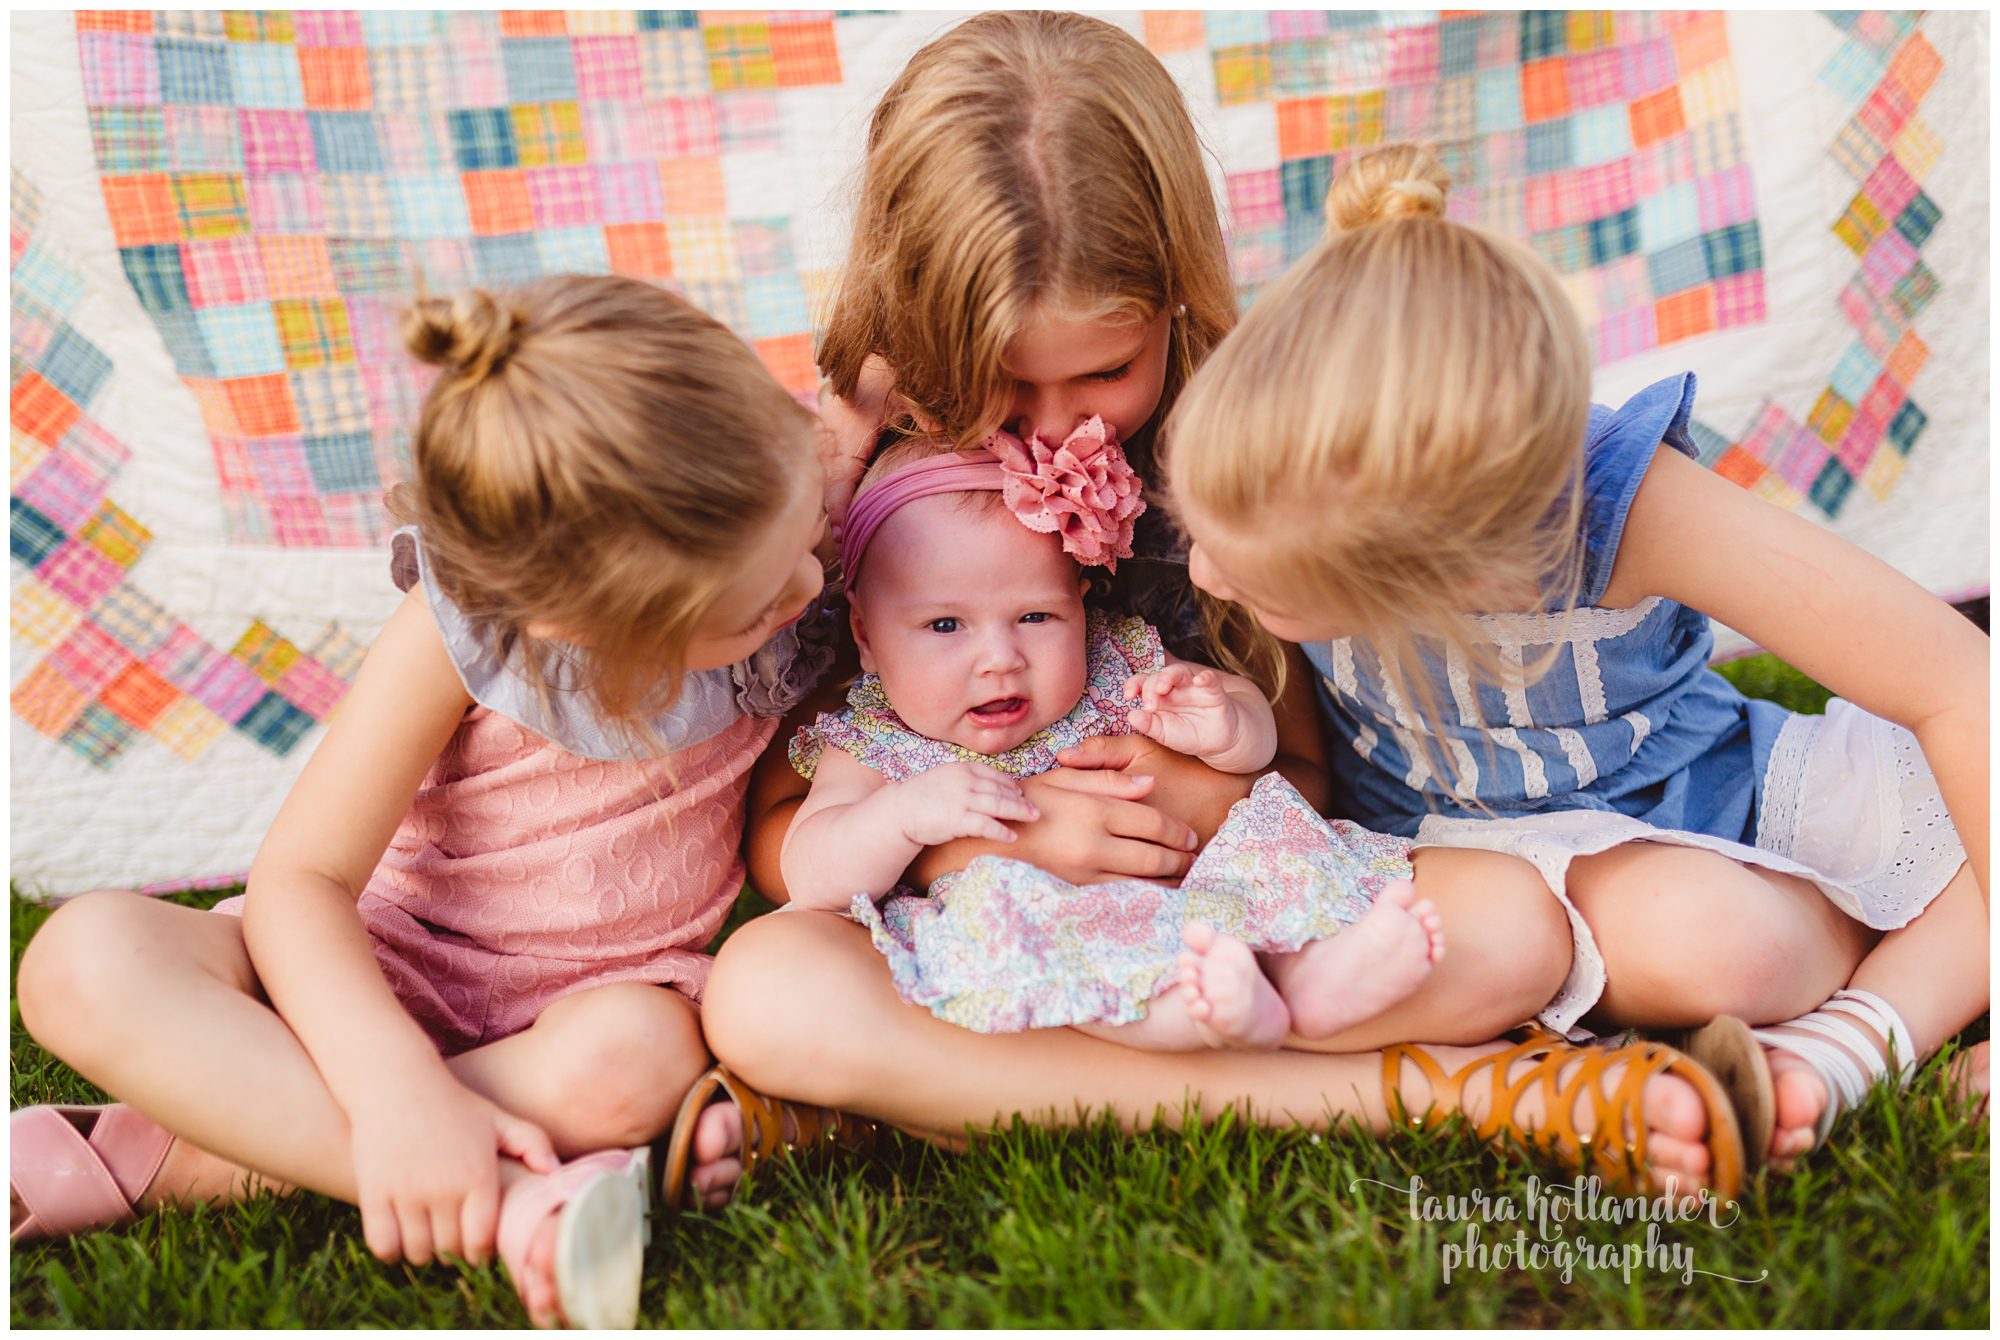 family of 6, four daughters, family portraits with quilt backdrop, Laura Hollander Photography Battle Creek MI